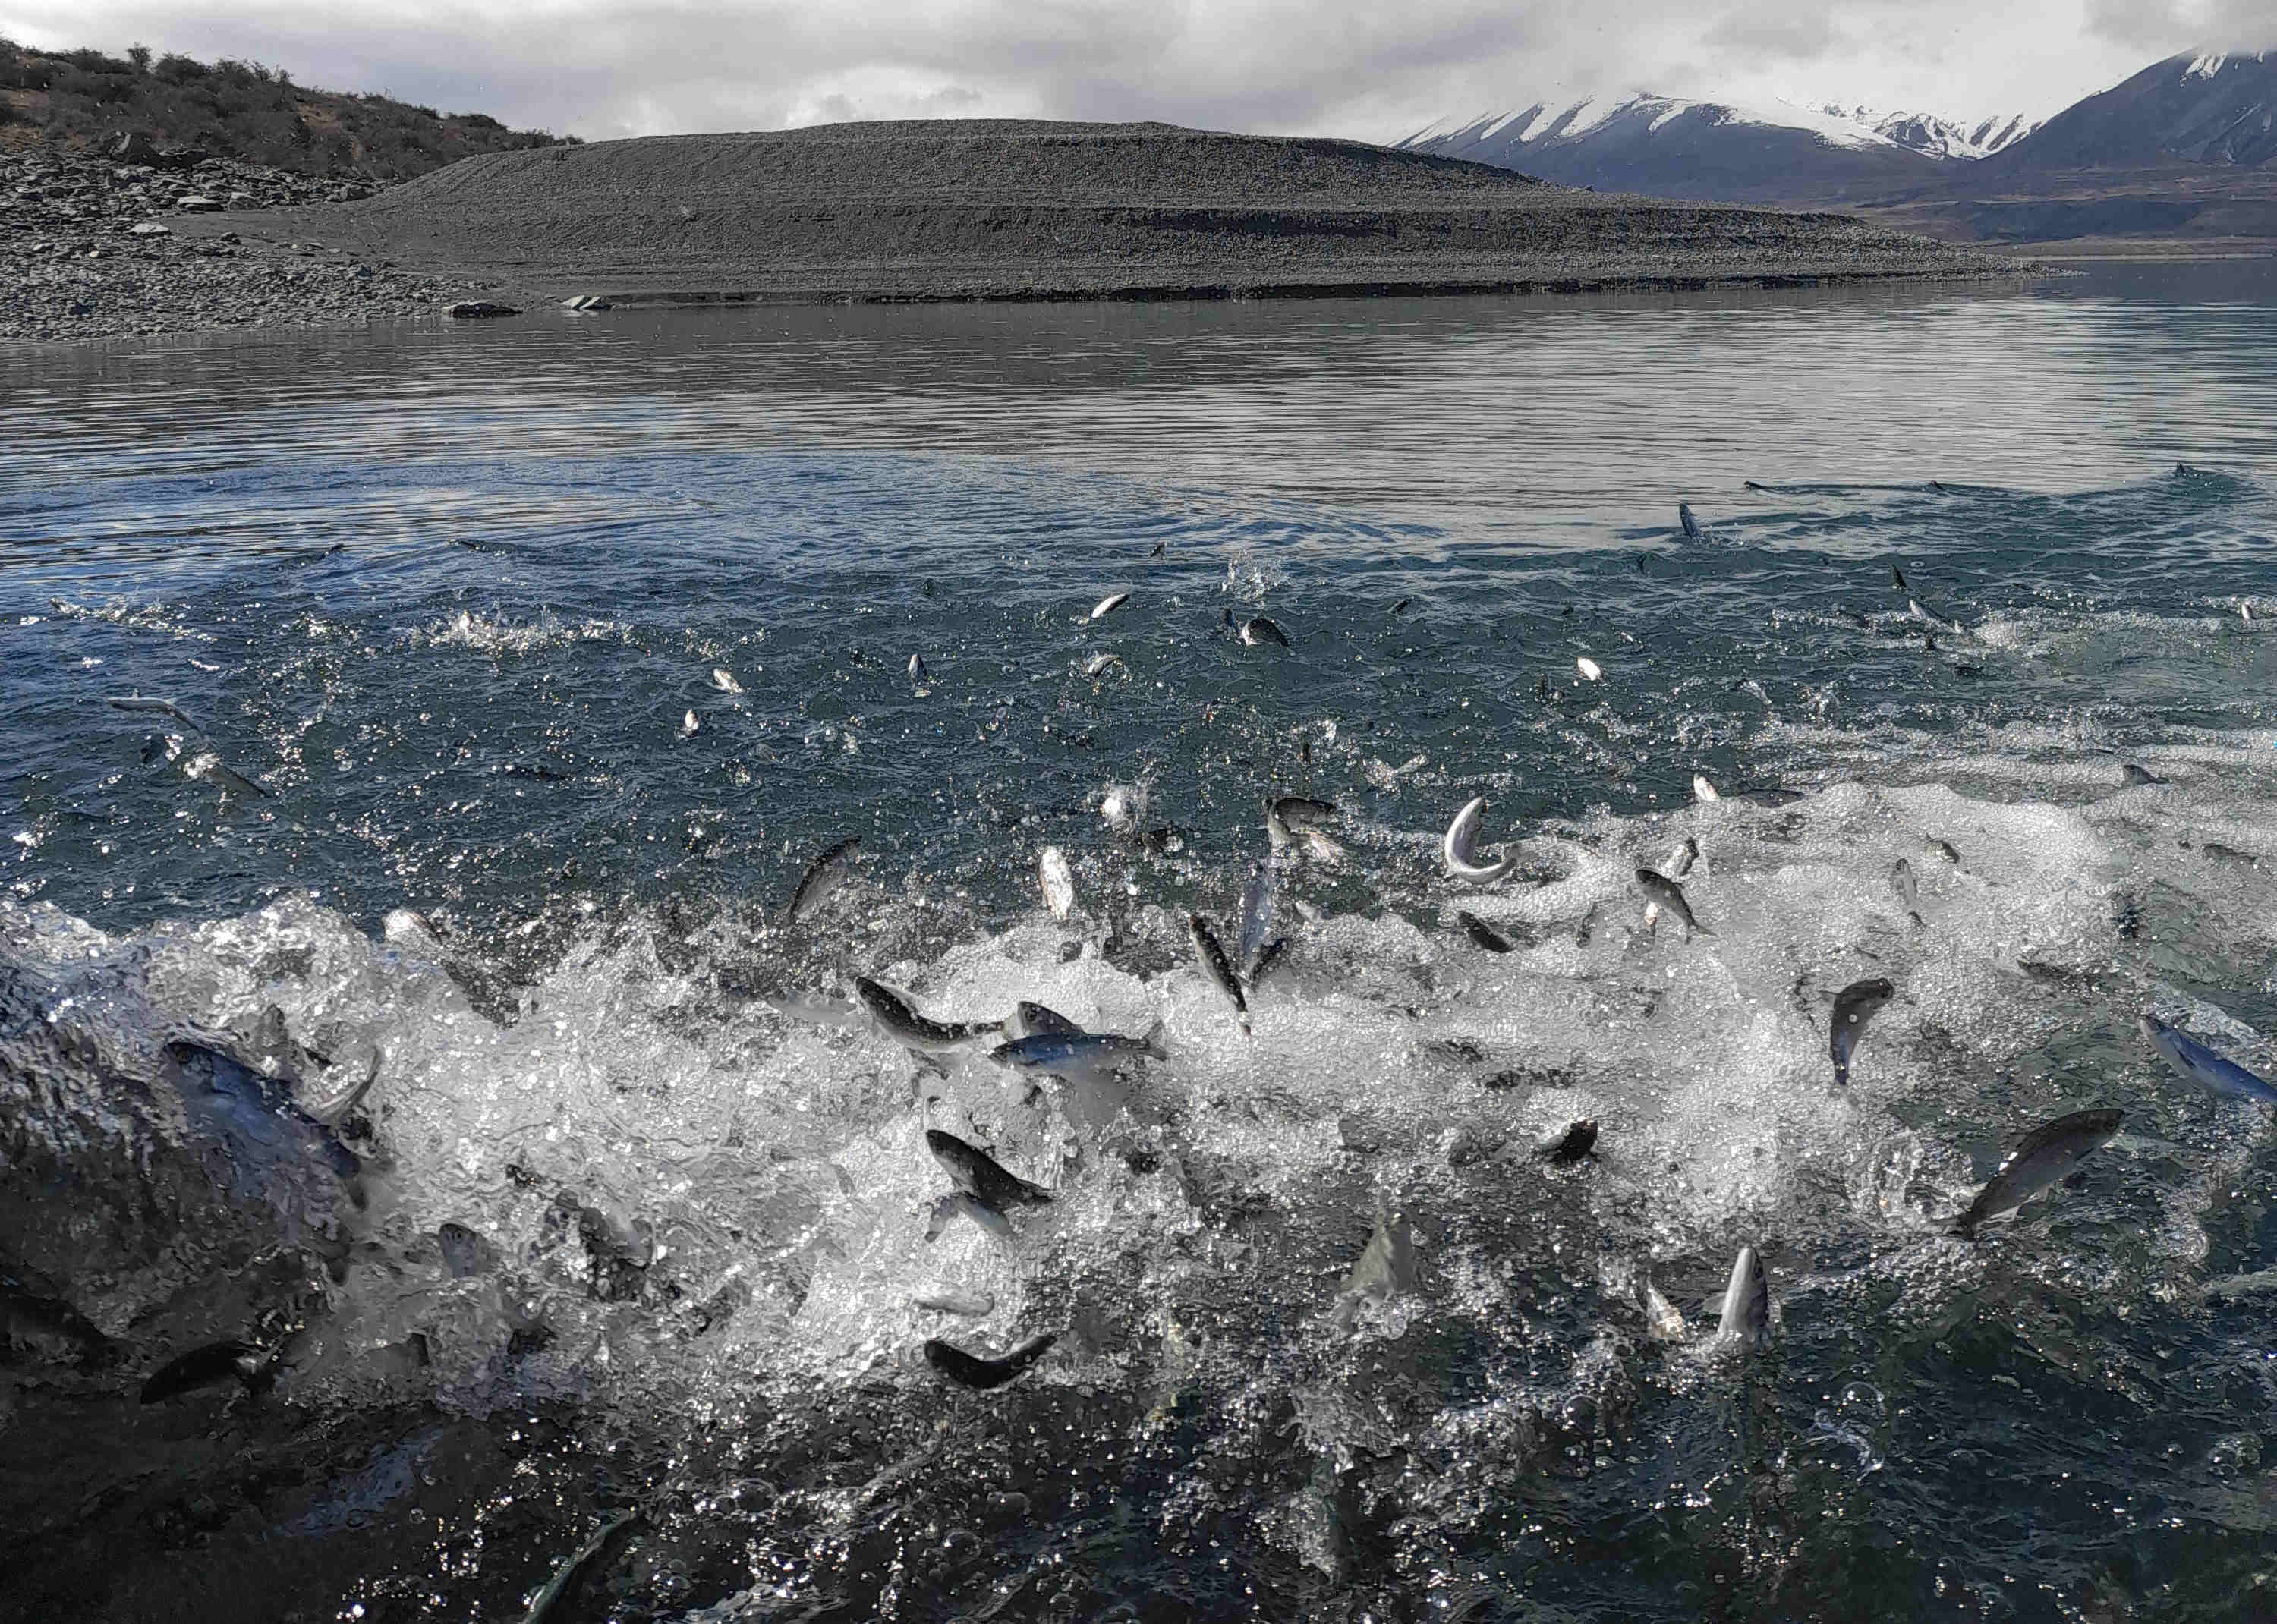 WFR2122.11 Fish Game released 9500 salmon smolt into Lake Tekapo to support its put n take salmon fishery credit H Stevens